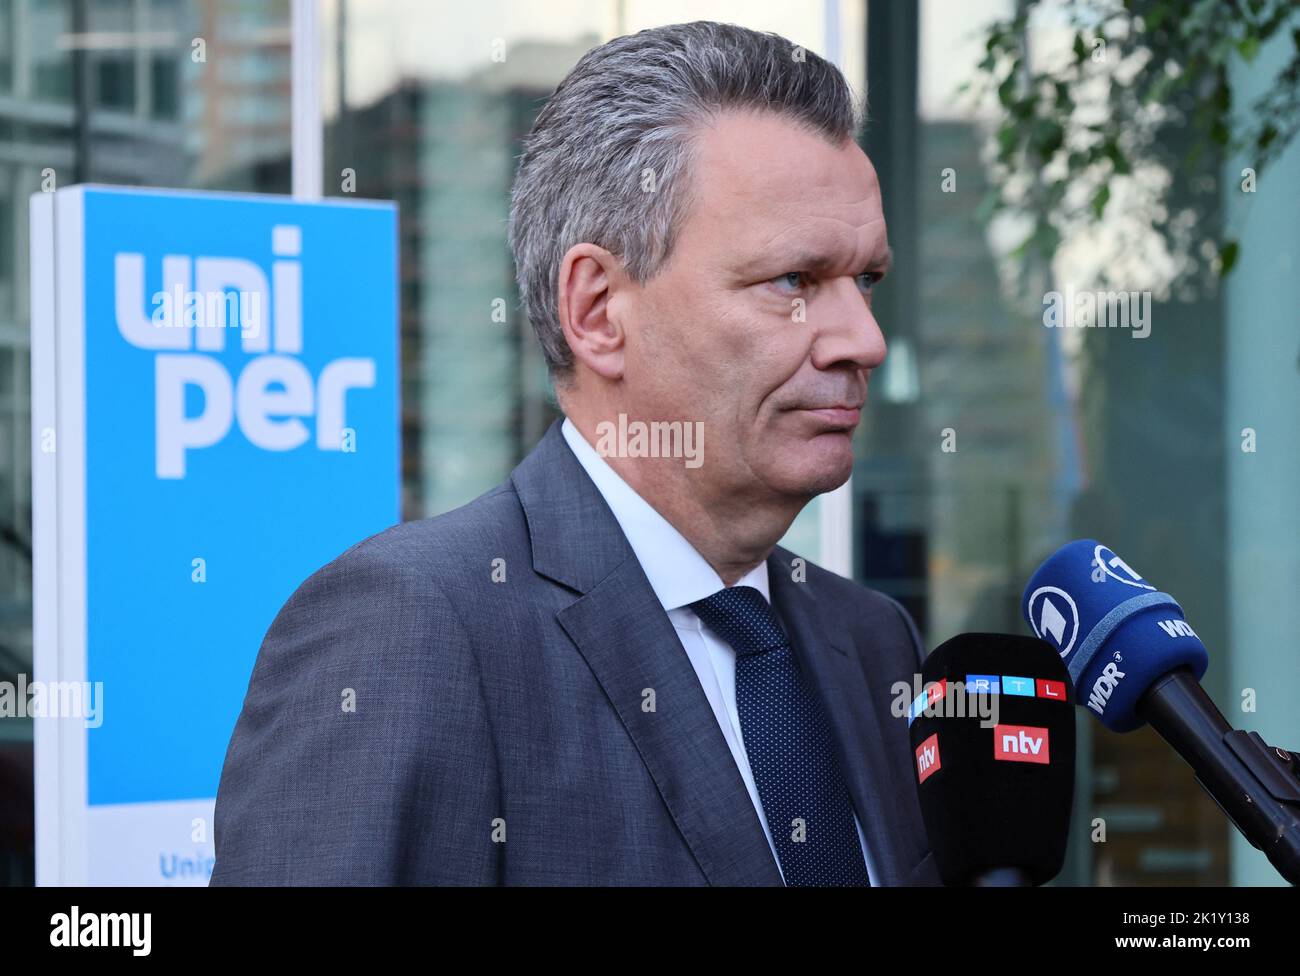 Klaus-Dieter Maubach, CEO of German utility Uniper, addresses the media after Germany has agreed to nationalize Uniper by buying Fortum's stake in the gas importer to secure operations and keep its business going, in Duesseldorf, Germany, September 21, 2022. REUTERS/Wolfgang Rattay Stock Photo